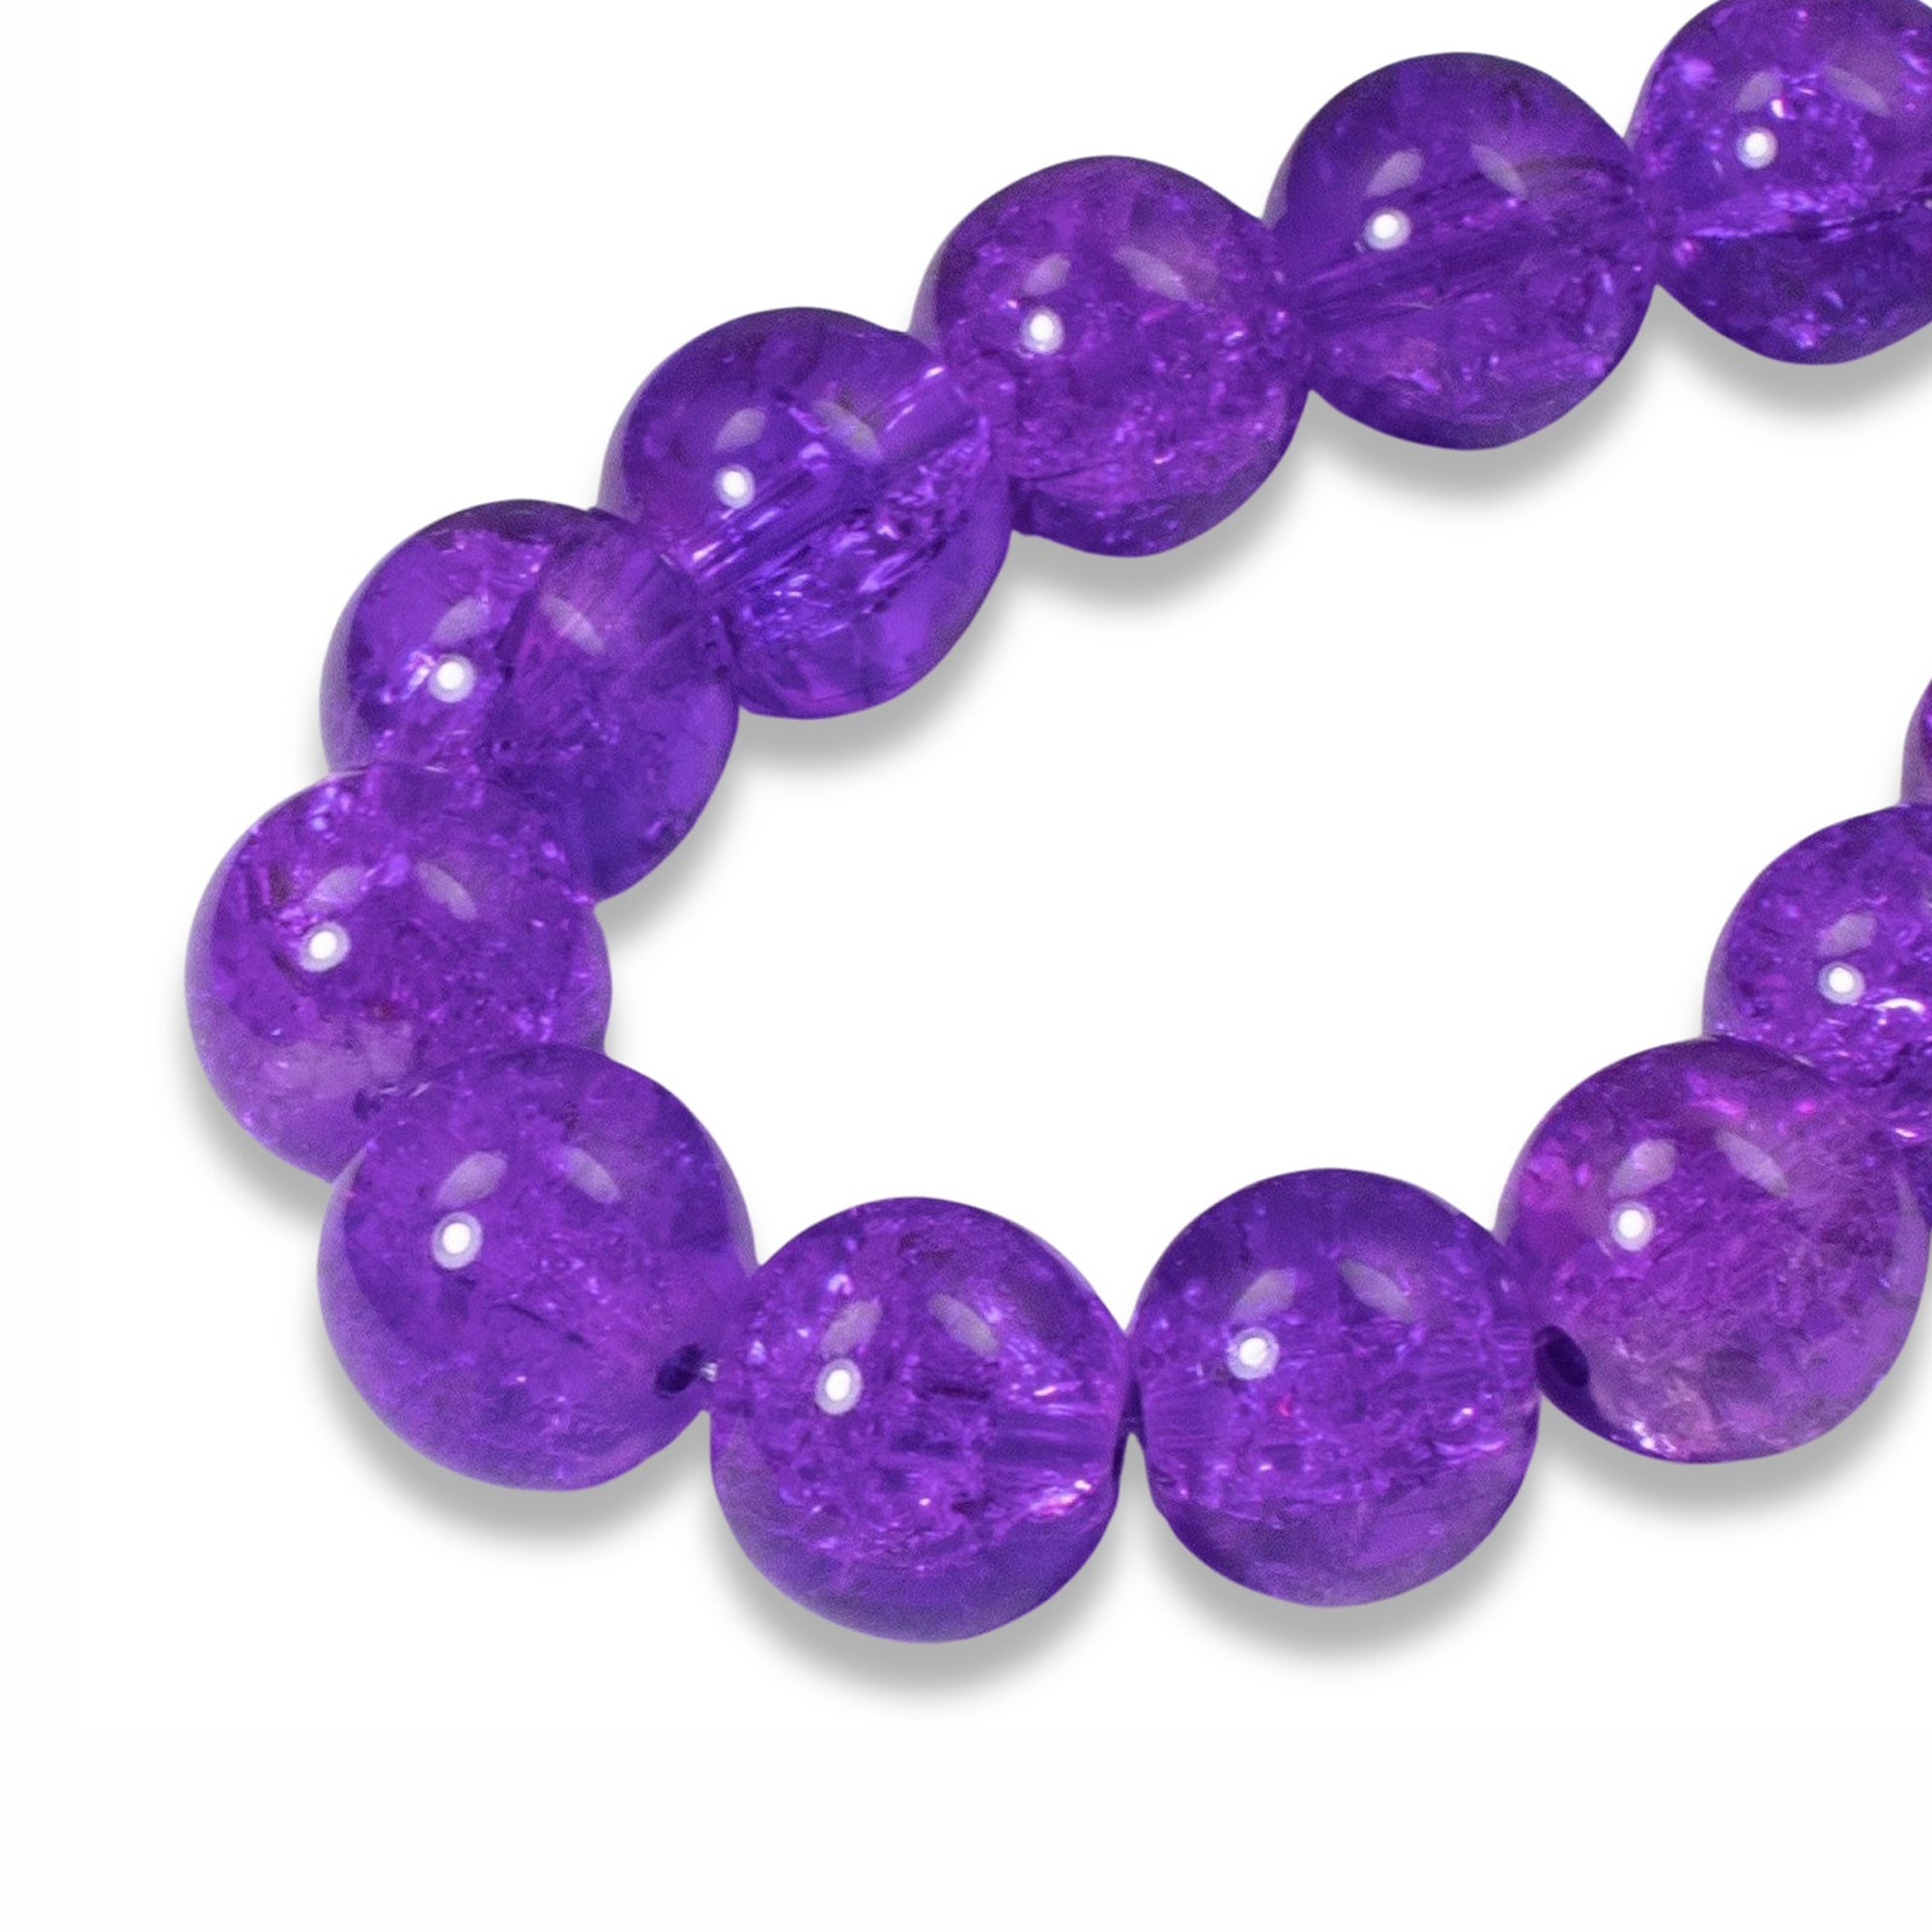 10x Crackle Glass Beads, 8mm Marbles Cracked Glass Beads, Purple